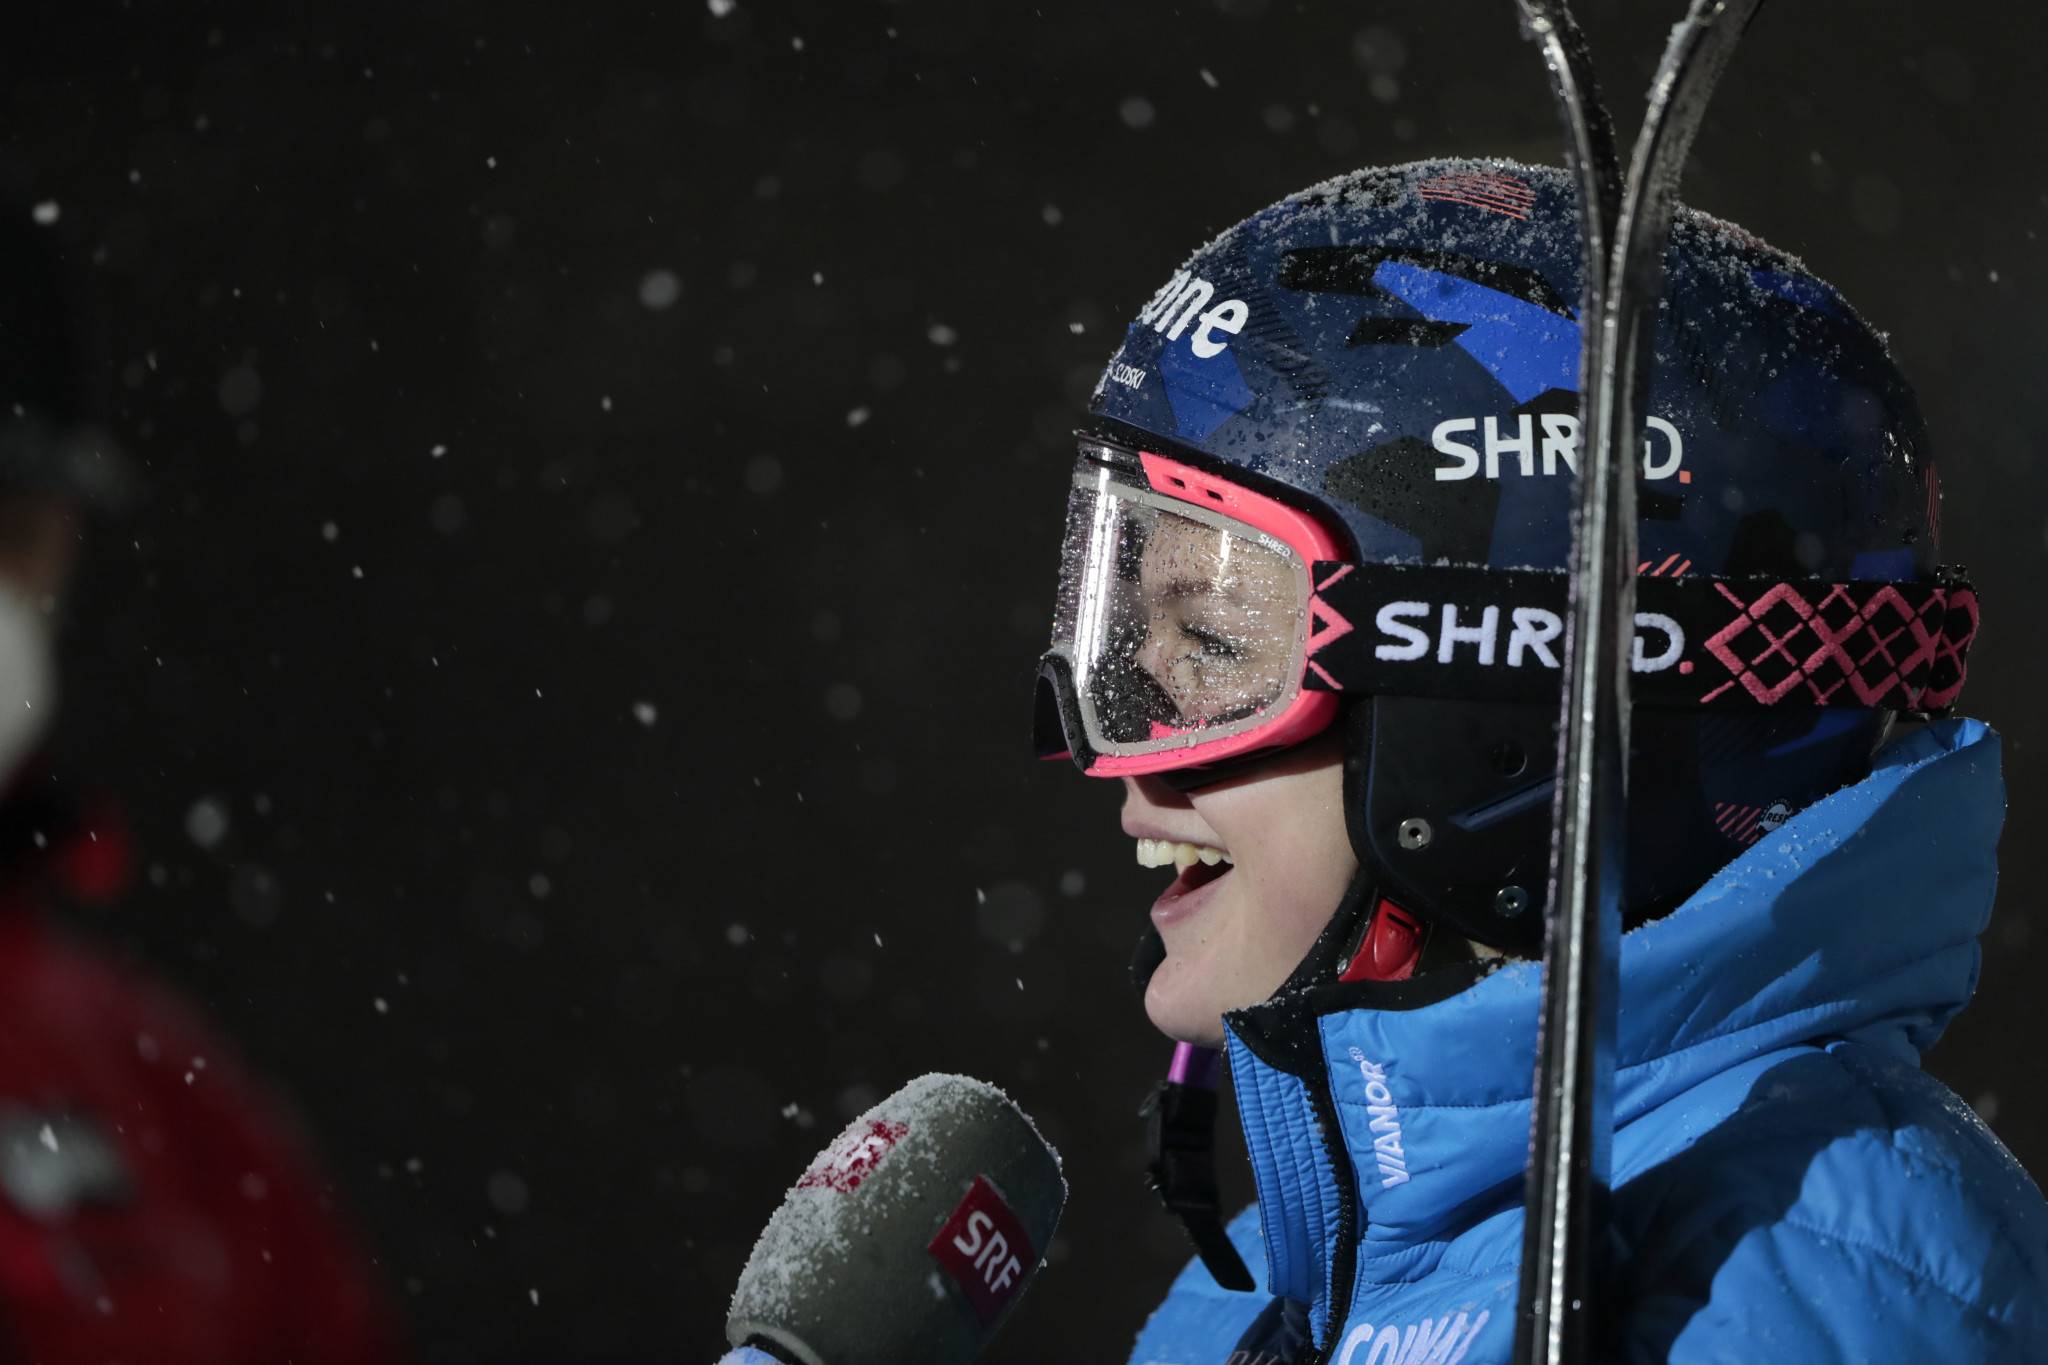 Andreja Slokar is the first Slovenian woman to win an Alpine World Cup race in 35 months ©Getty Images